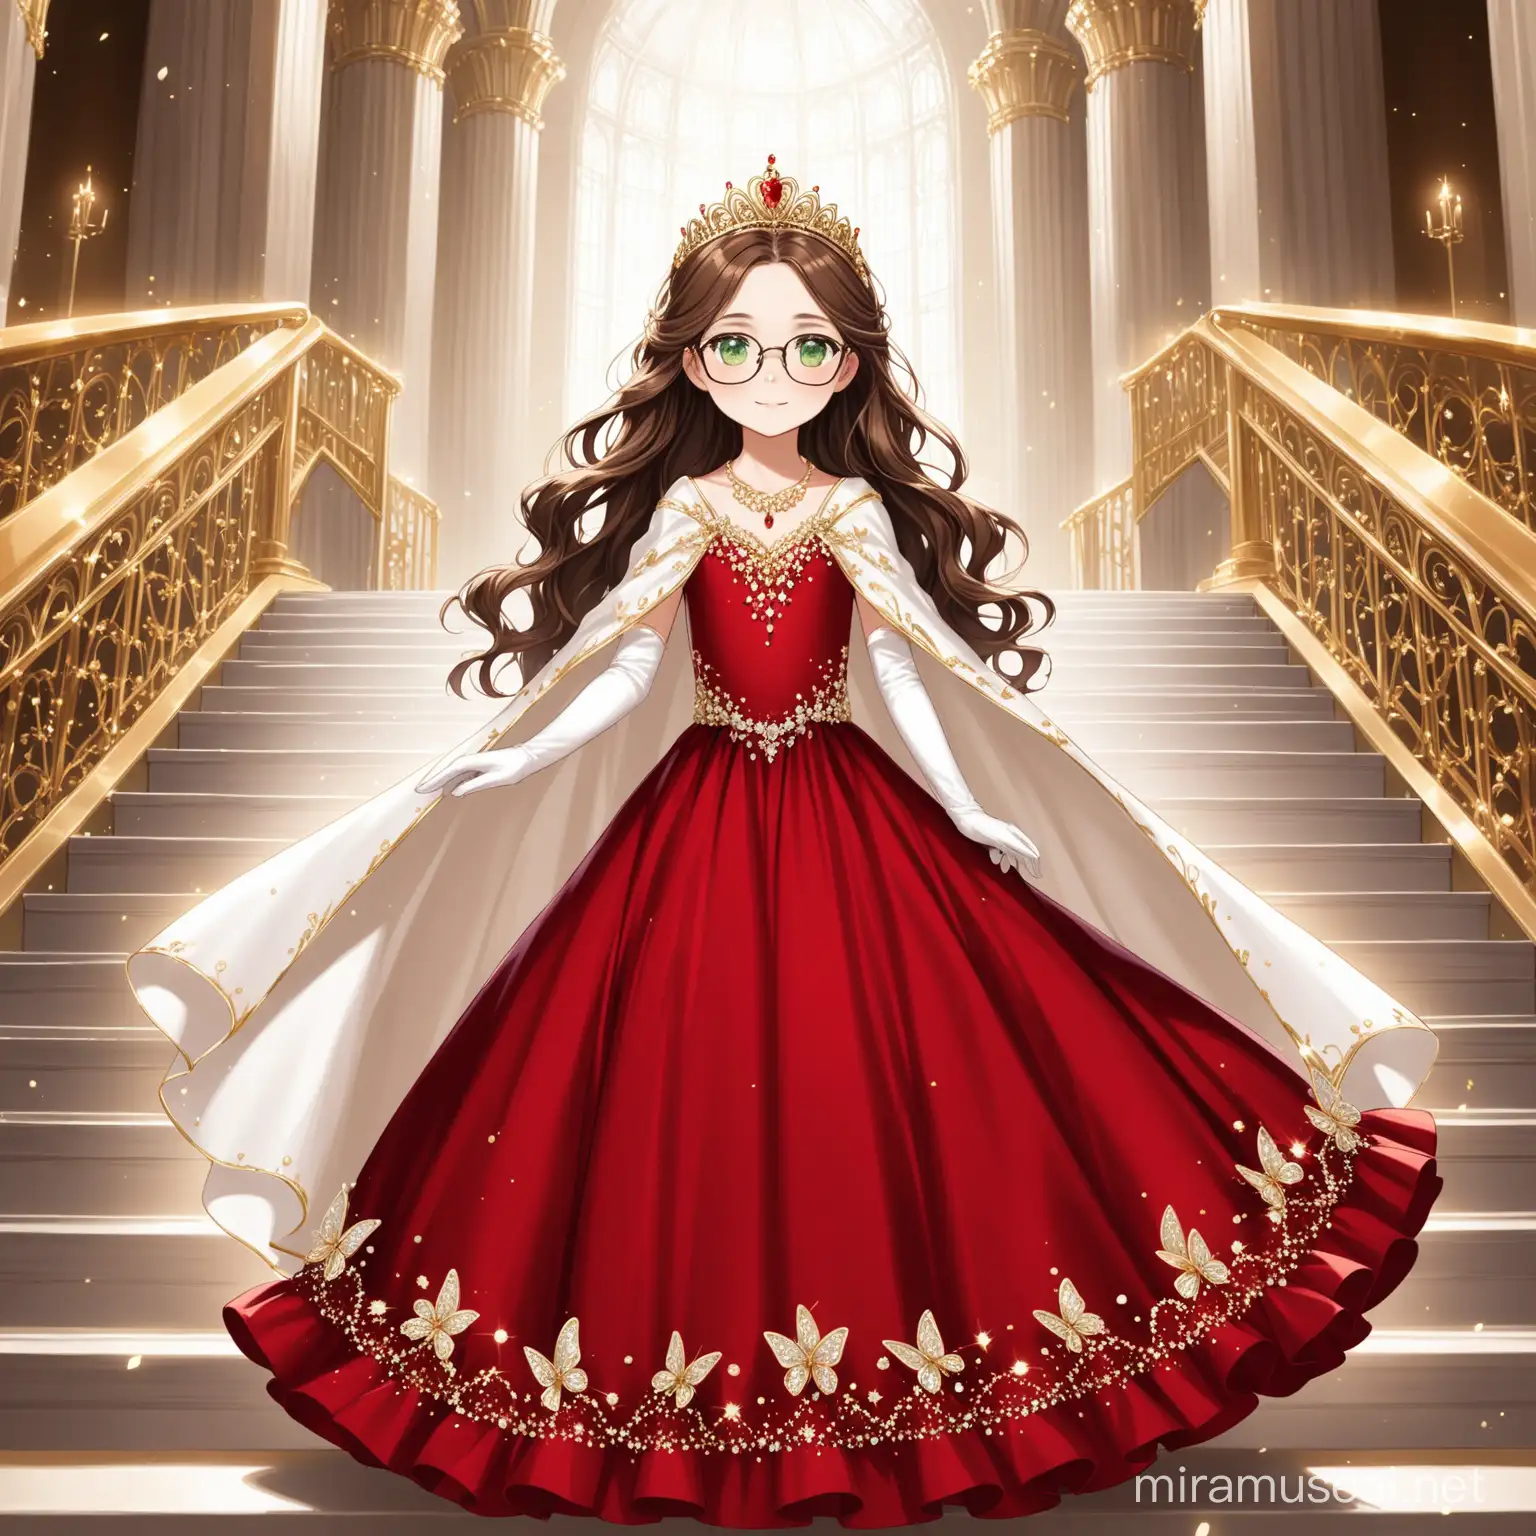 11 year old girl, long flowy brown hair, wavy red ball gown, white jeweled butterfly in her hair, gold tiara, white dainty shoes, white evening gloves, gold necklace, white cape, green eyes, black glasses, grand staircase, 